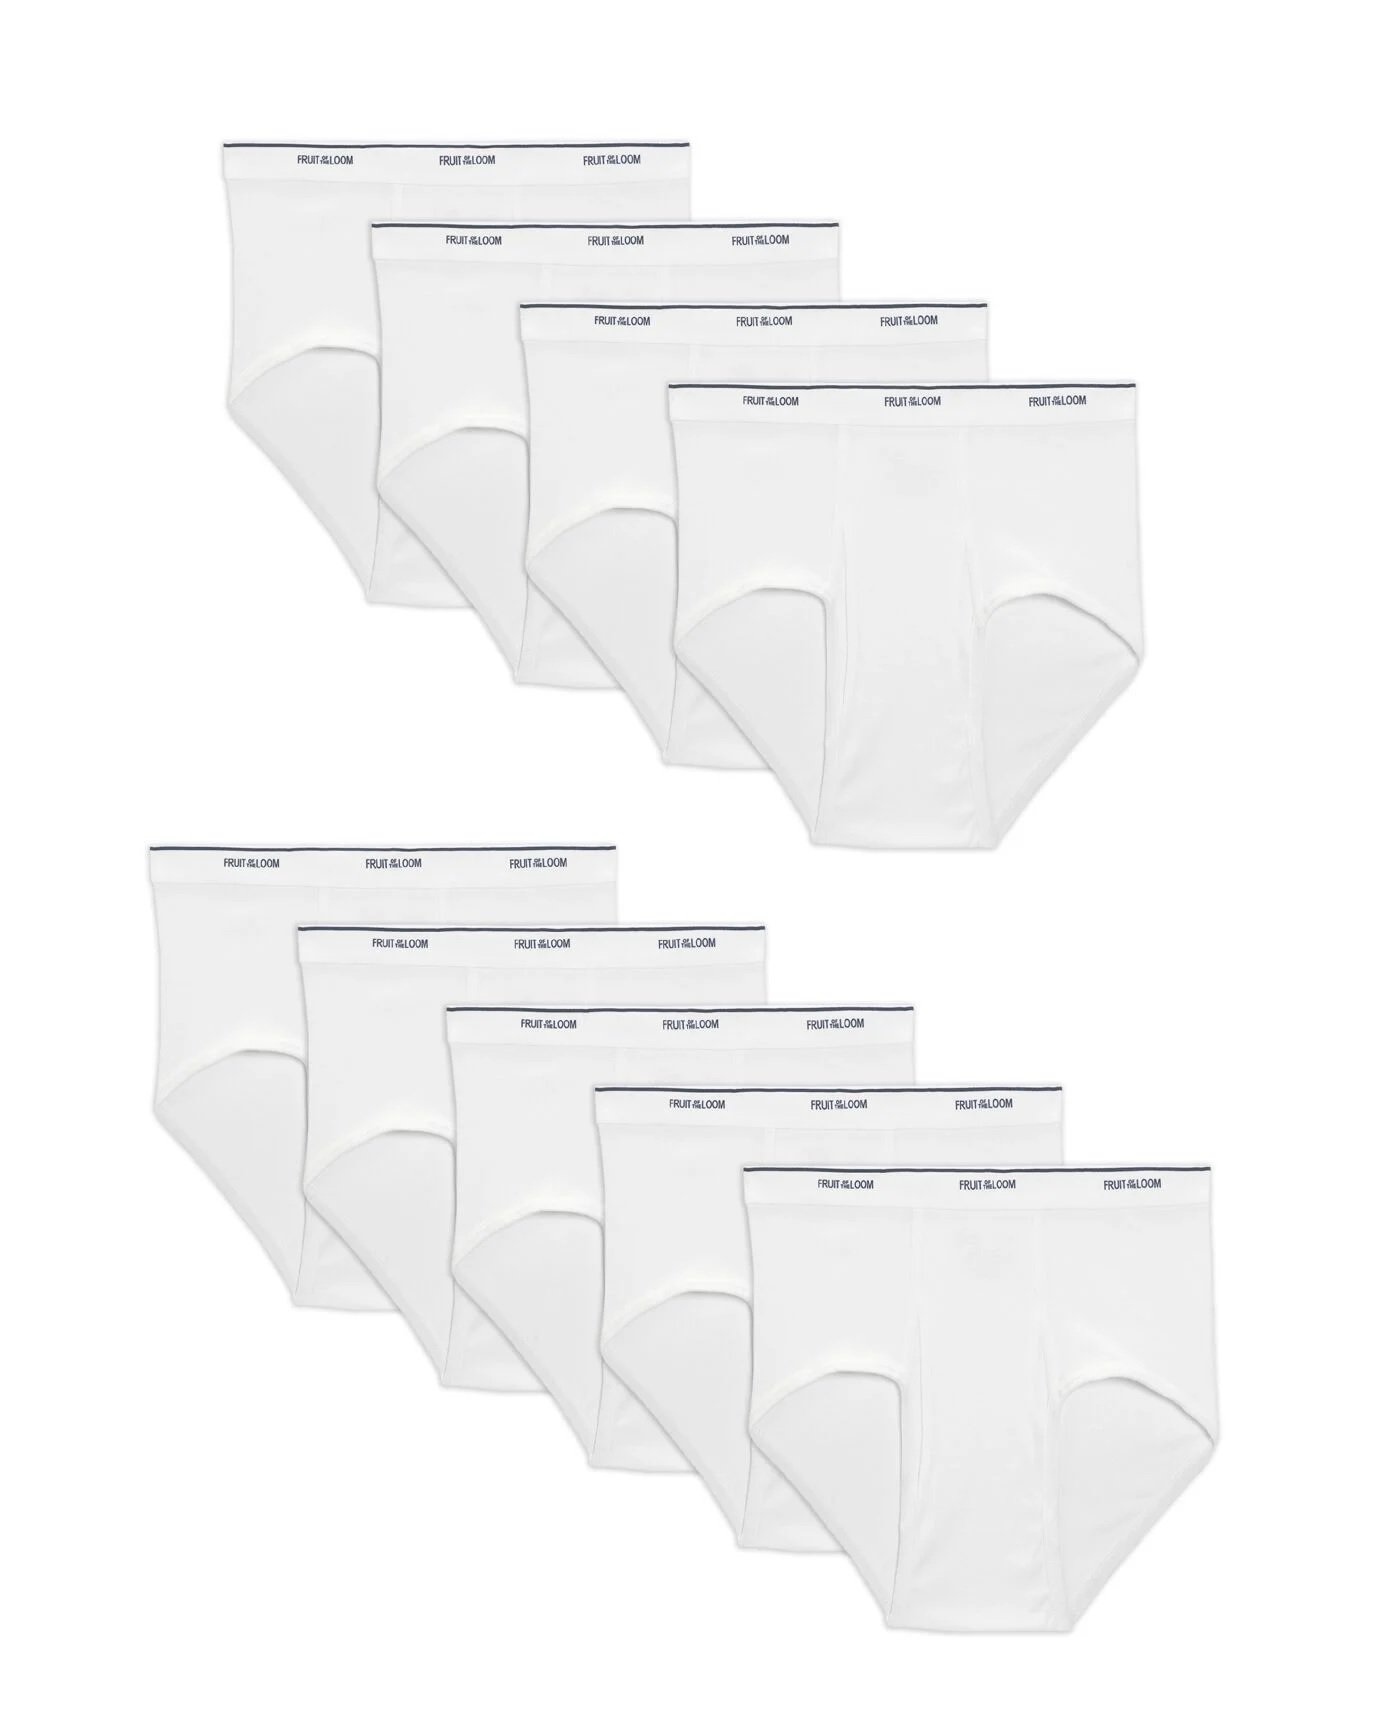 Fruit of the Loom Men's White Briefs, 9 Pack - image 1 of 6